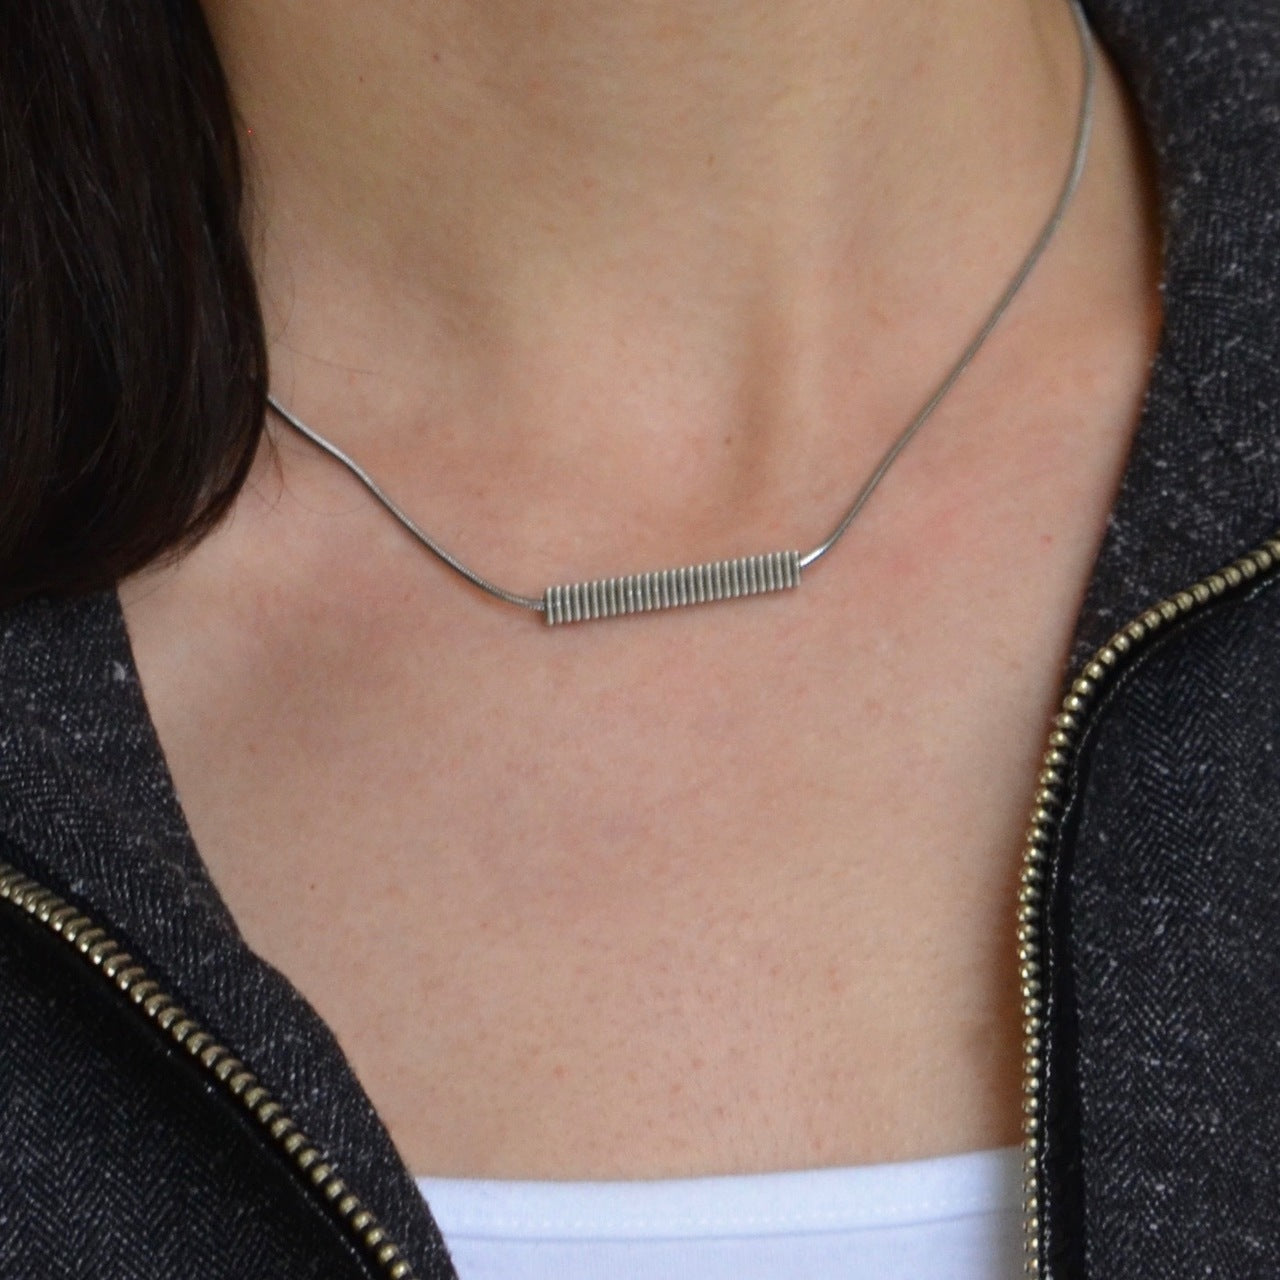 Electric Guitar String Necklace - Wound Up